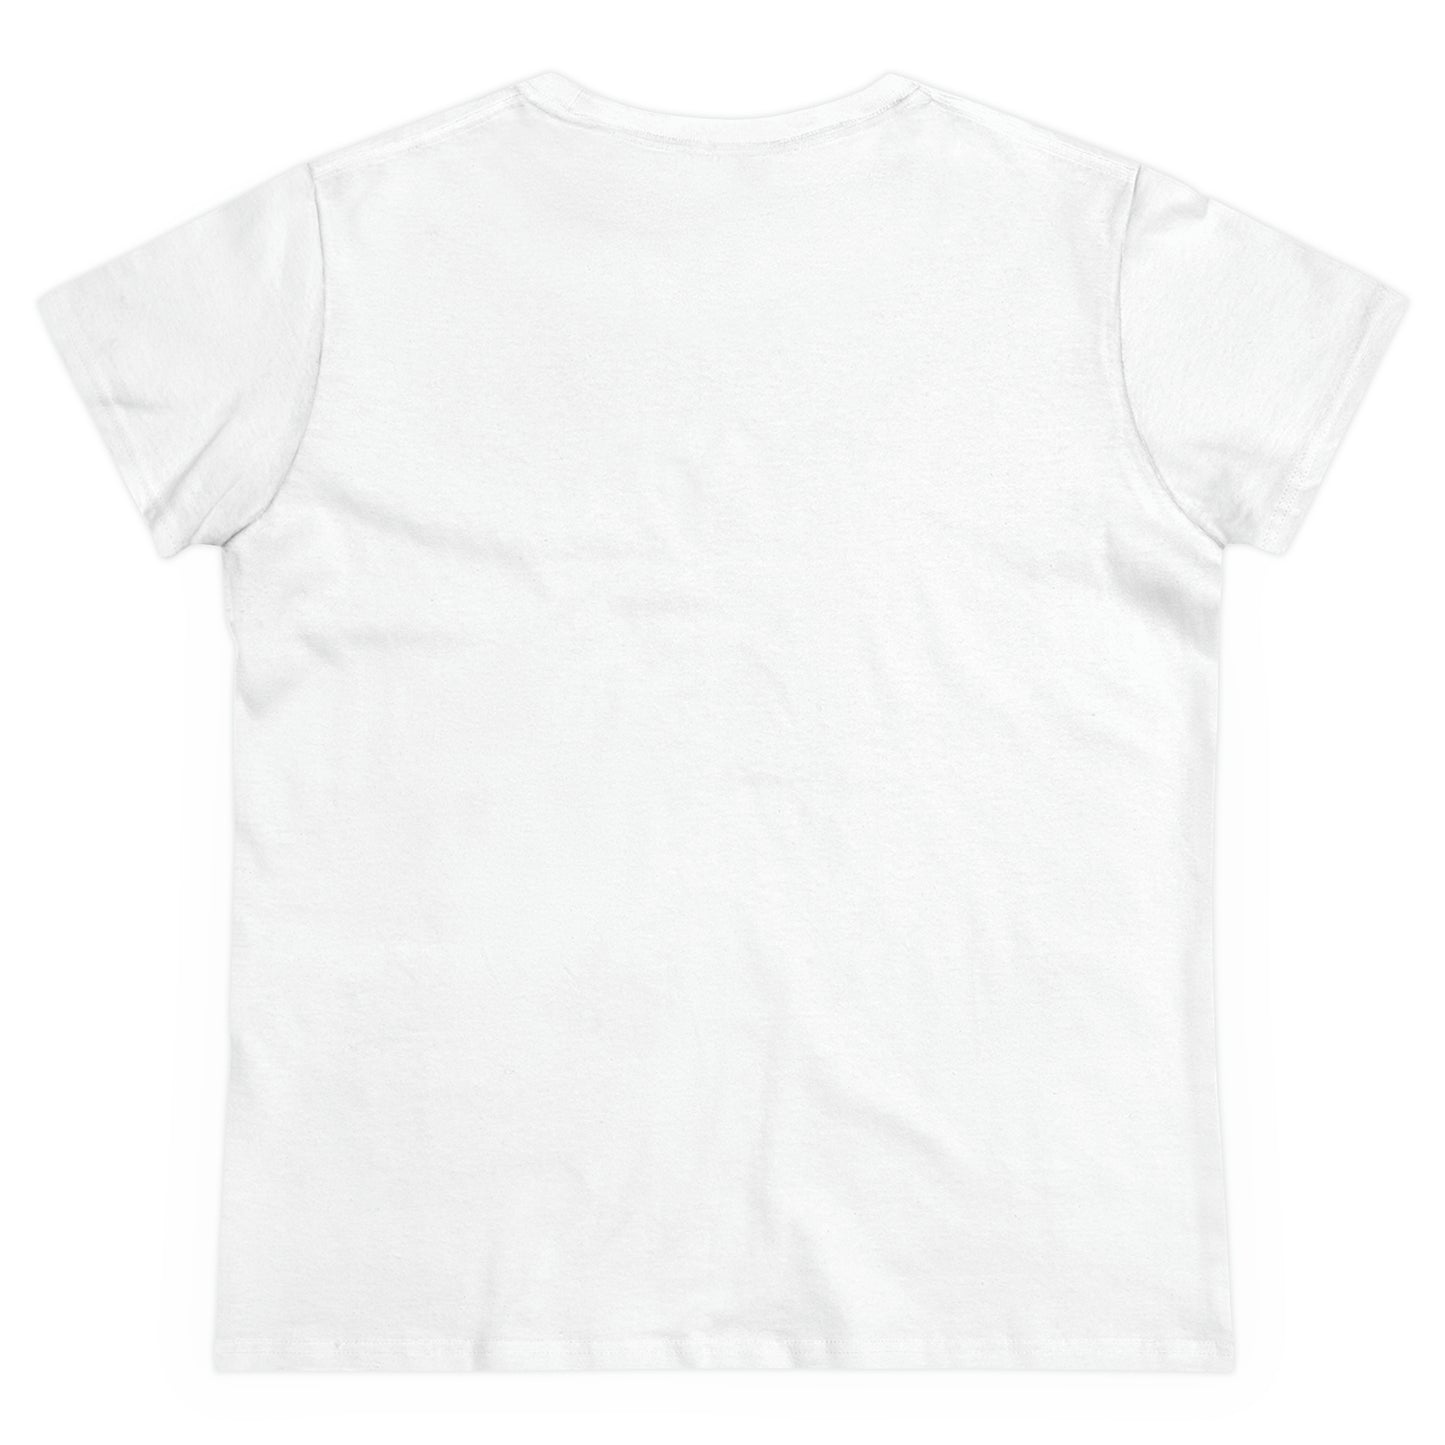 Flat back view of the white shirt